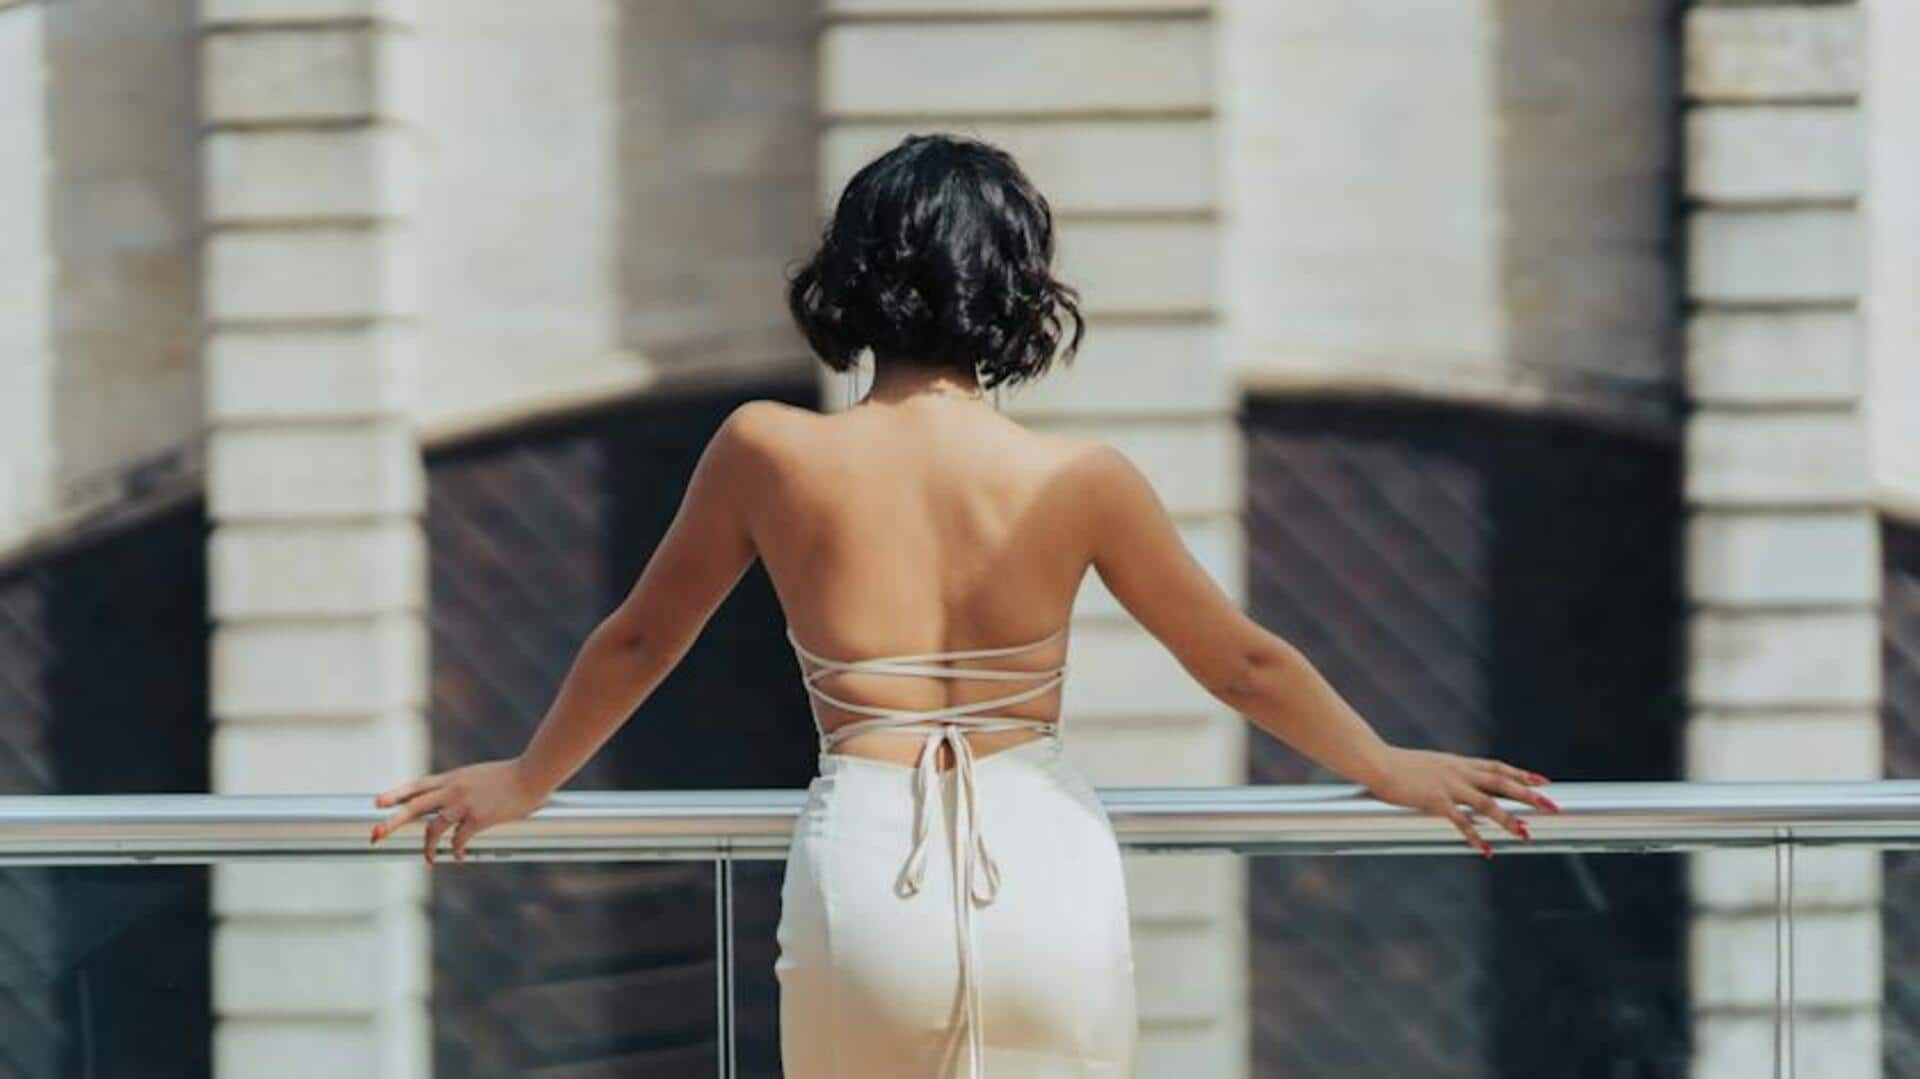 11 Tips on How to Rock a Backless Dress with Style & Confidence